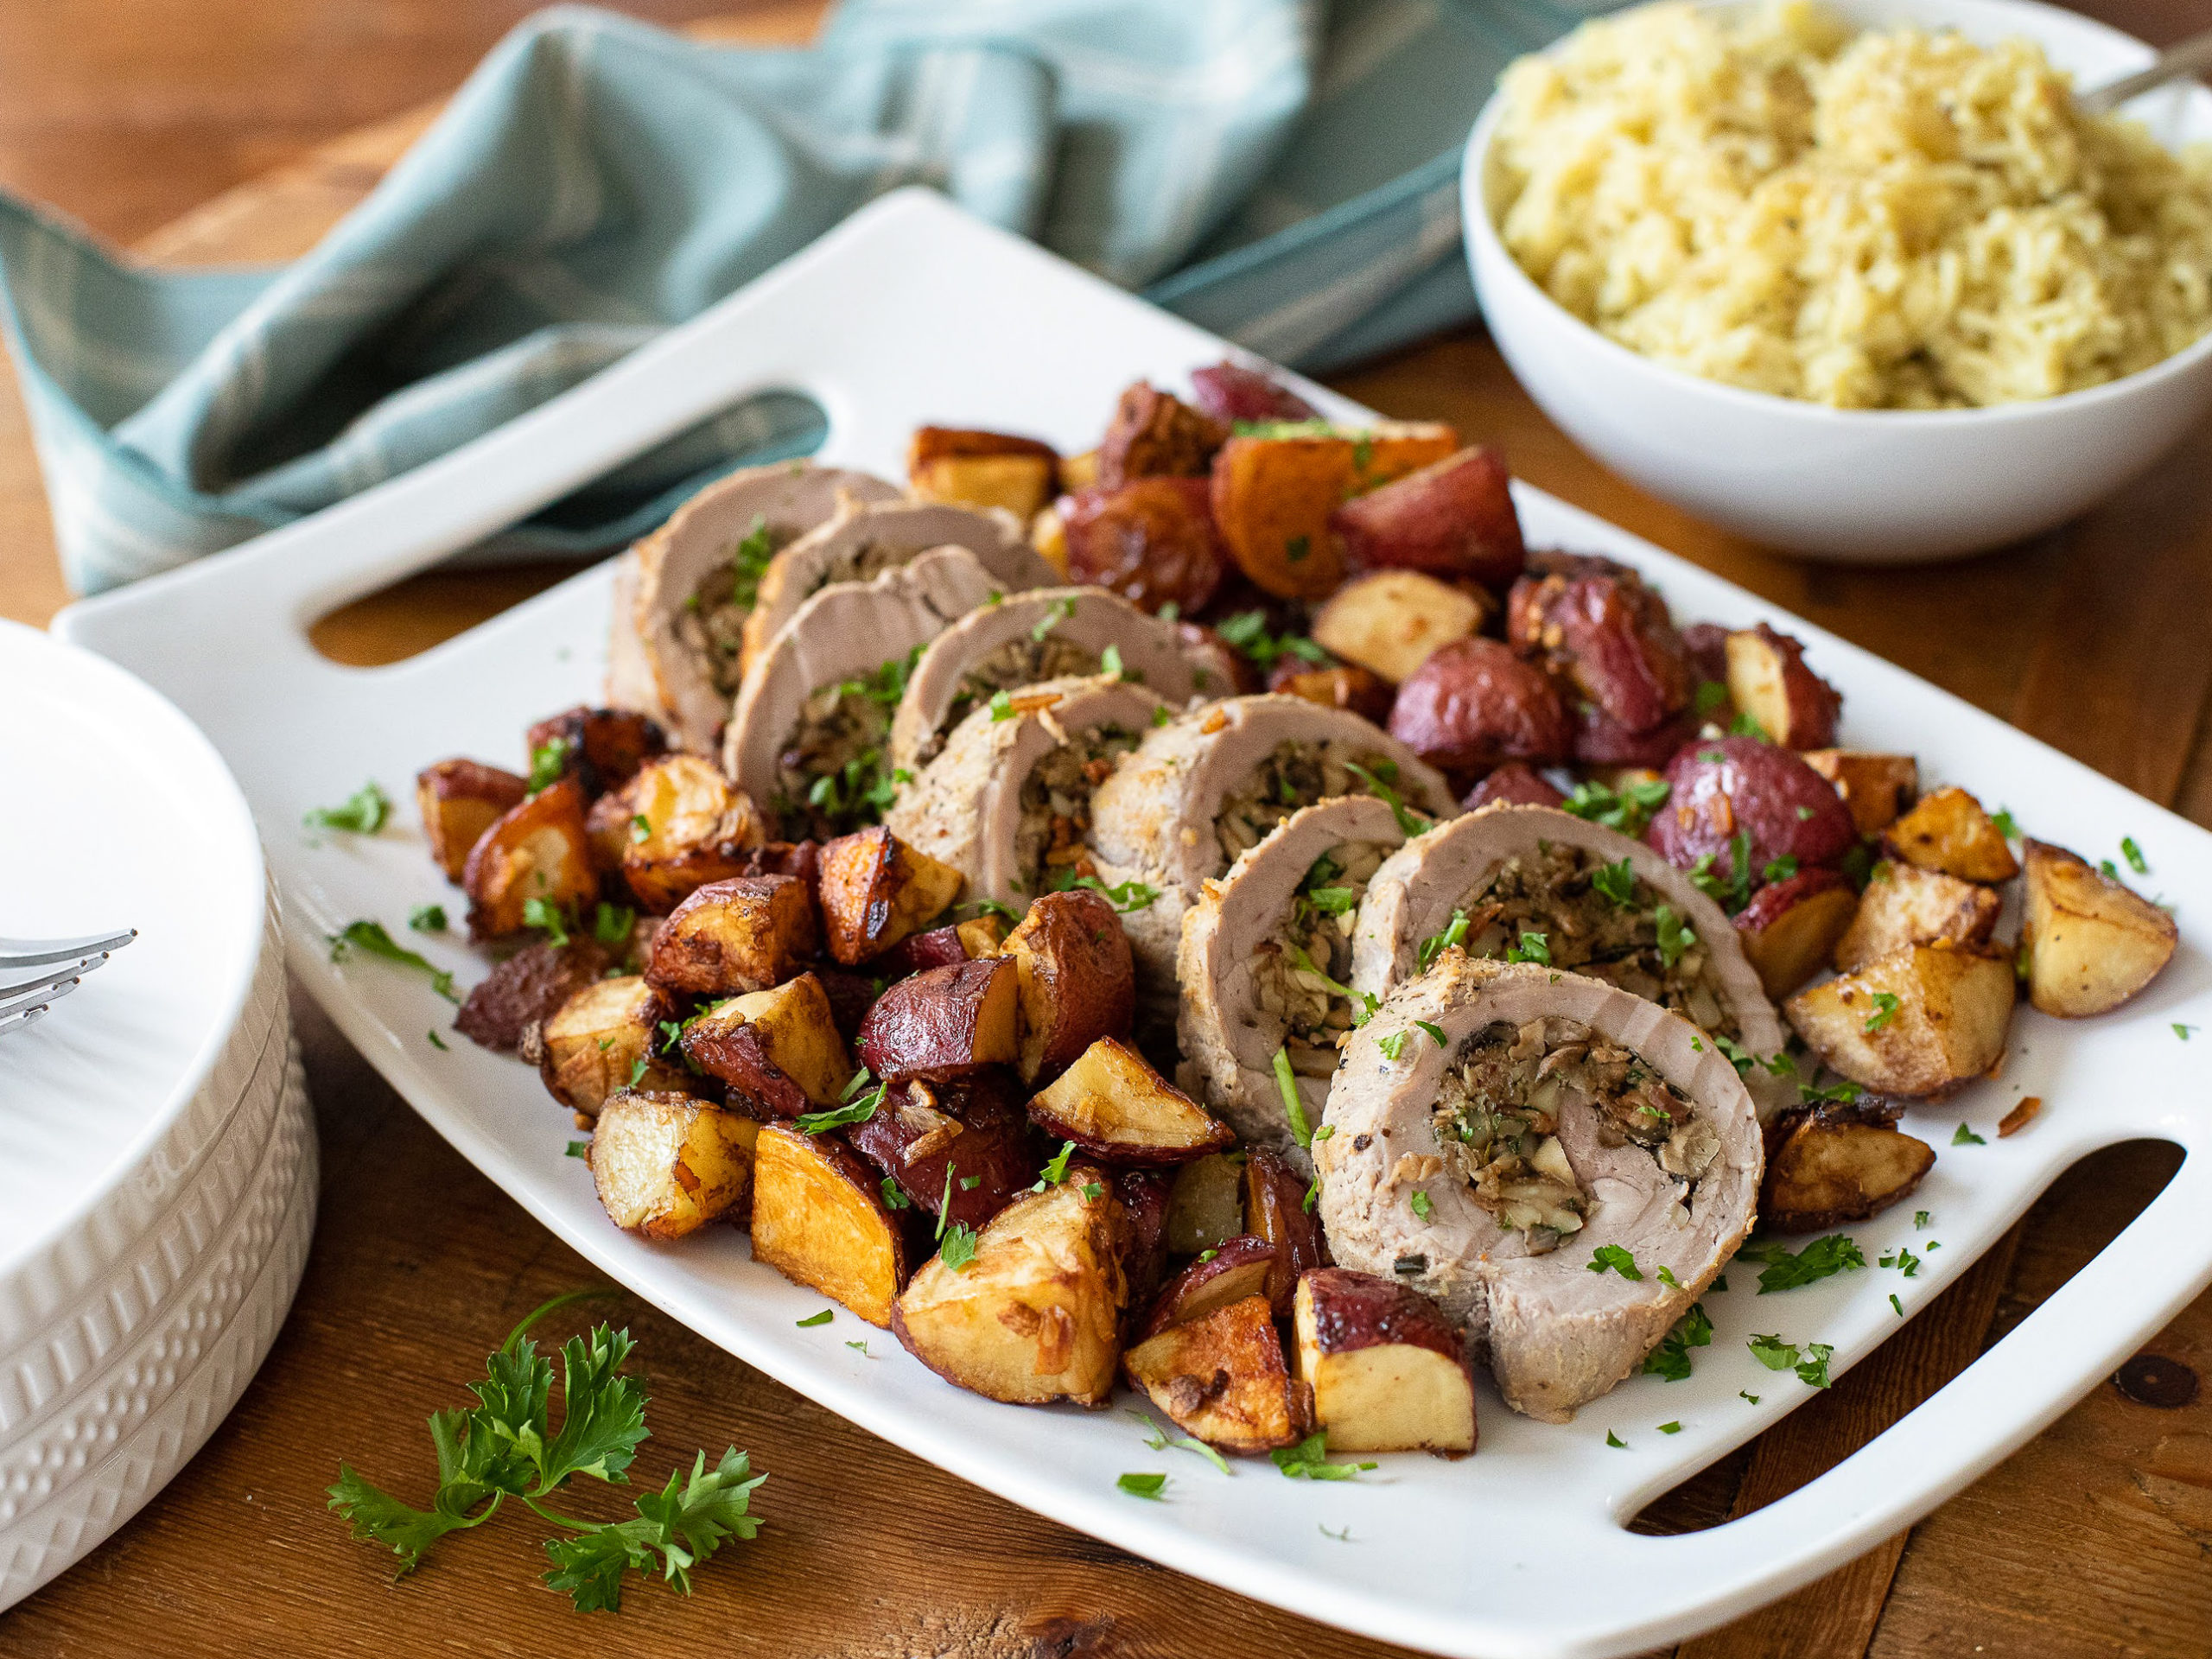 Pick Up Delicious Meal Essentials And Save BIG At Publix - Try My Stuffed Pork Loin & Roasted Potatoes on I Heart Publix 2